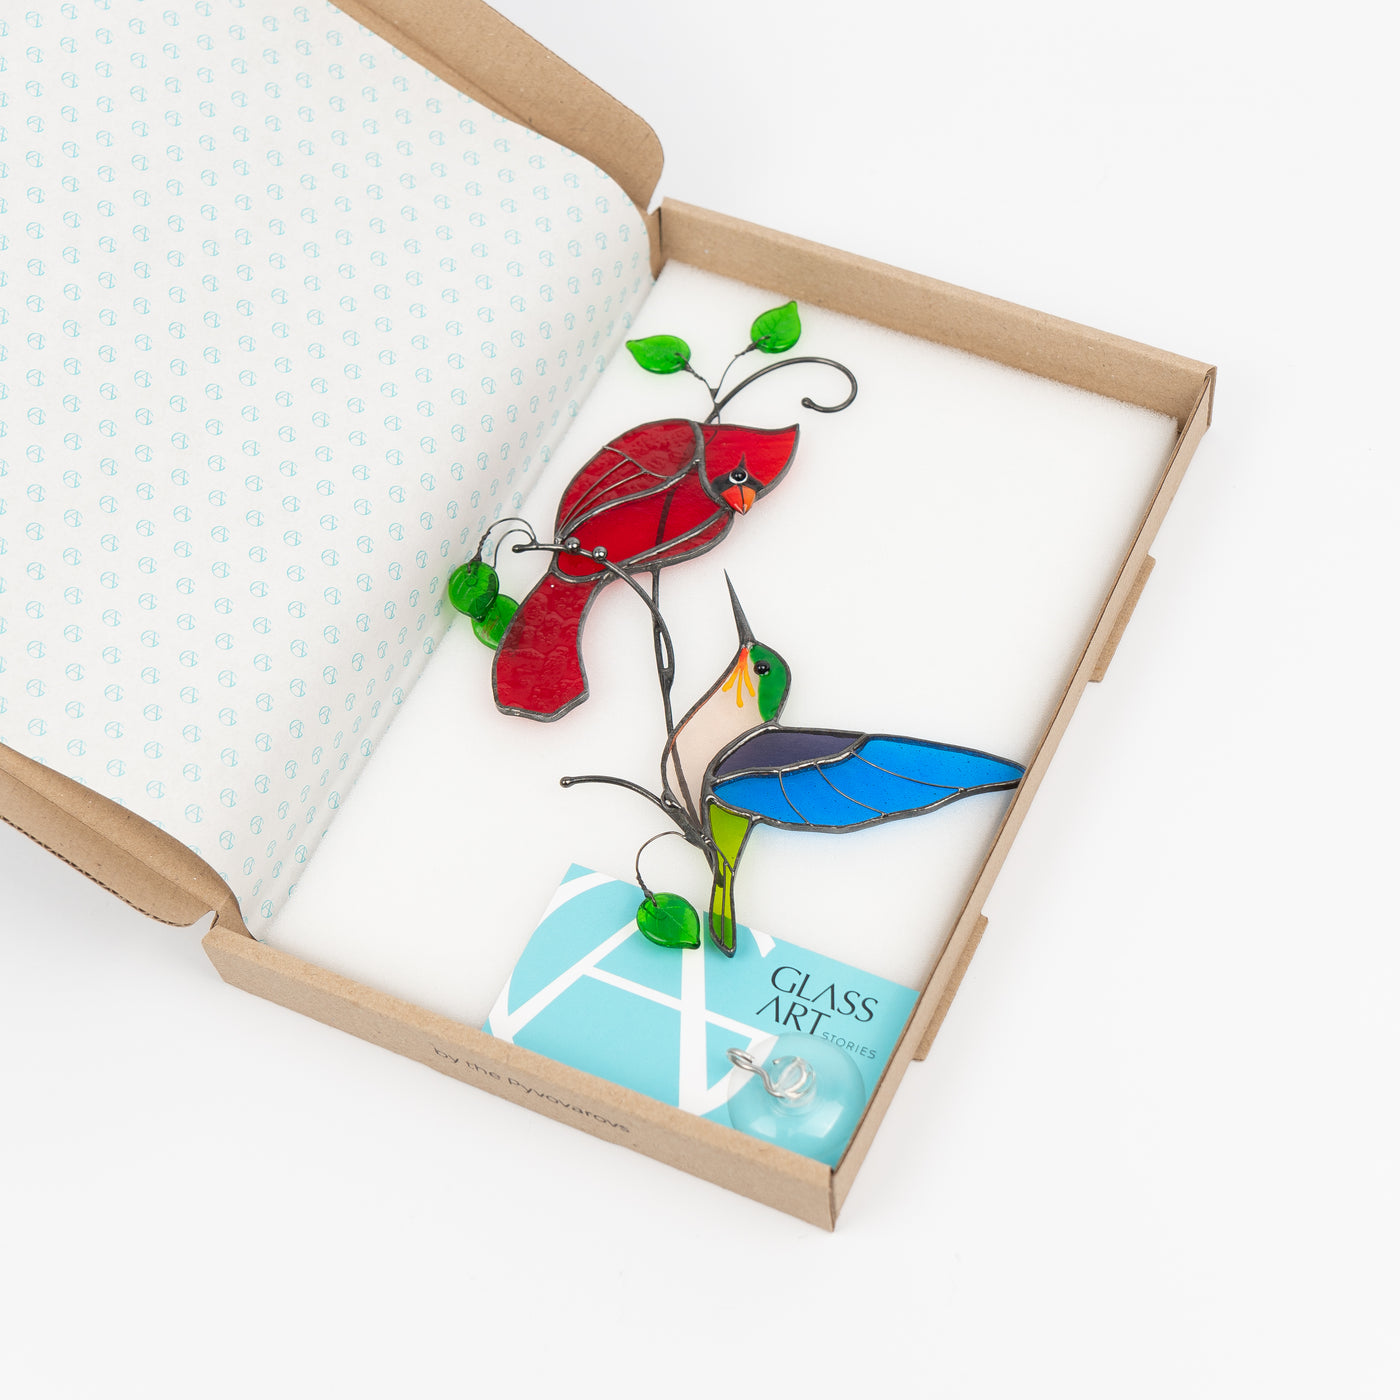 Stained glass suncatcher of cardinal and hummingbird in a brand box